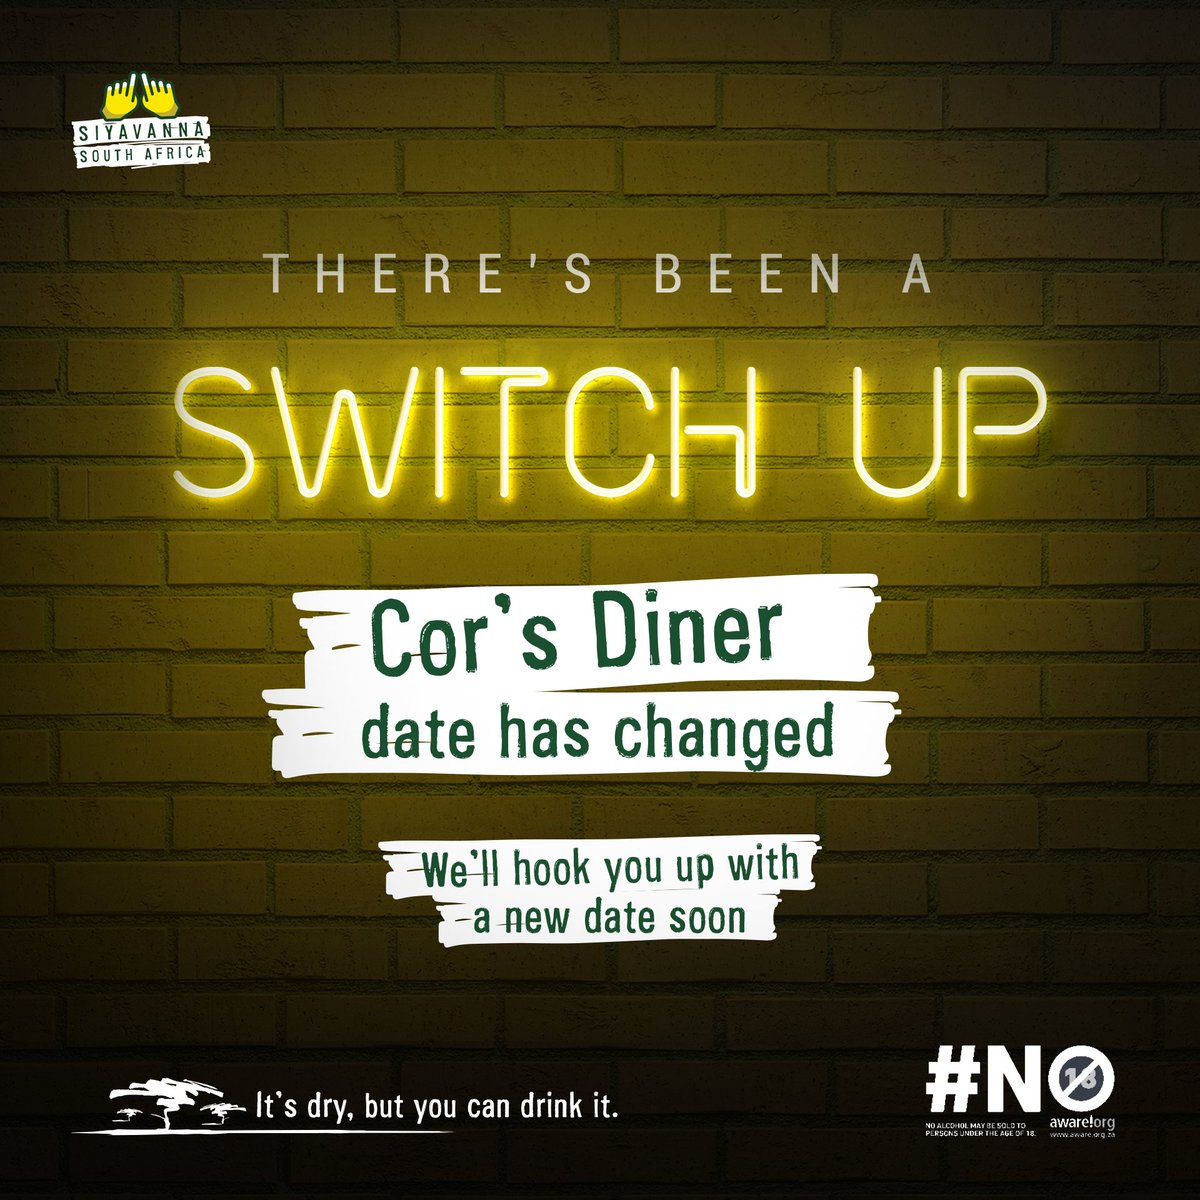 We are switching things up for Cor's Diner, where we will have the #SavannaComedyBar coming up soon ungasabi. We will keep you in the loop for the rescheduled date. #ShowUpForStandUp #SiyavannaSA